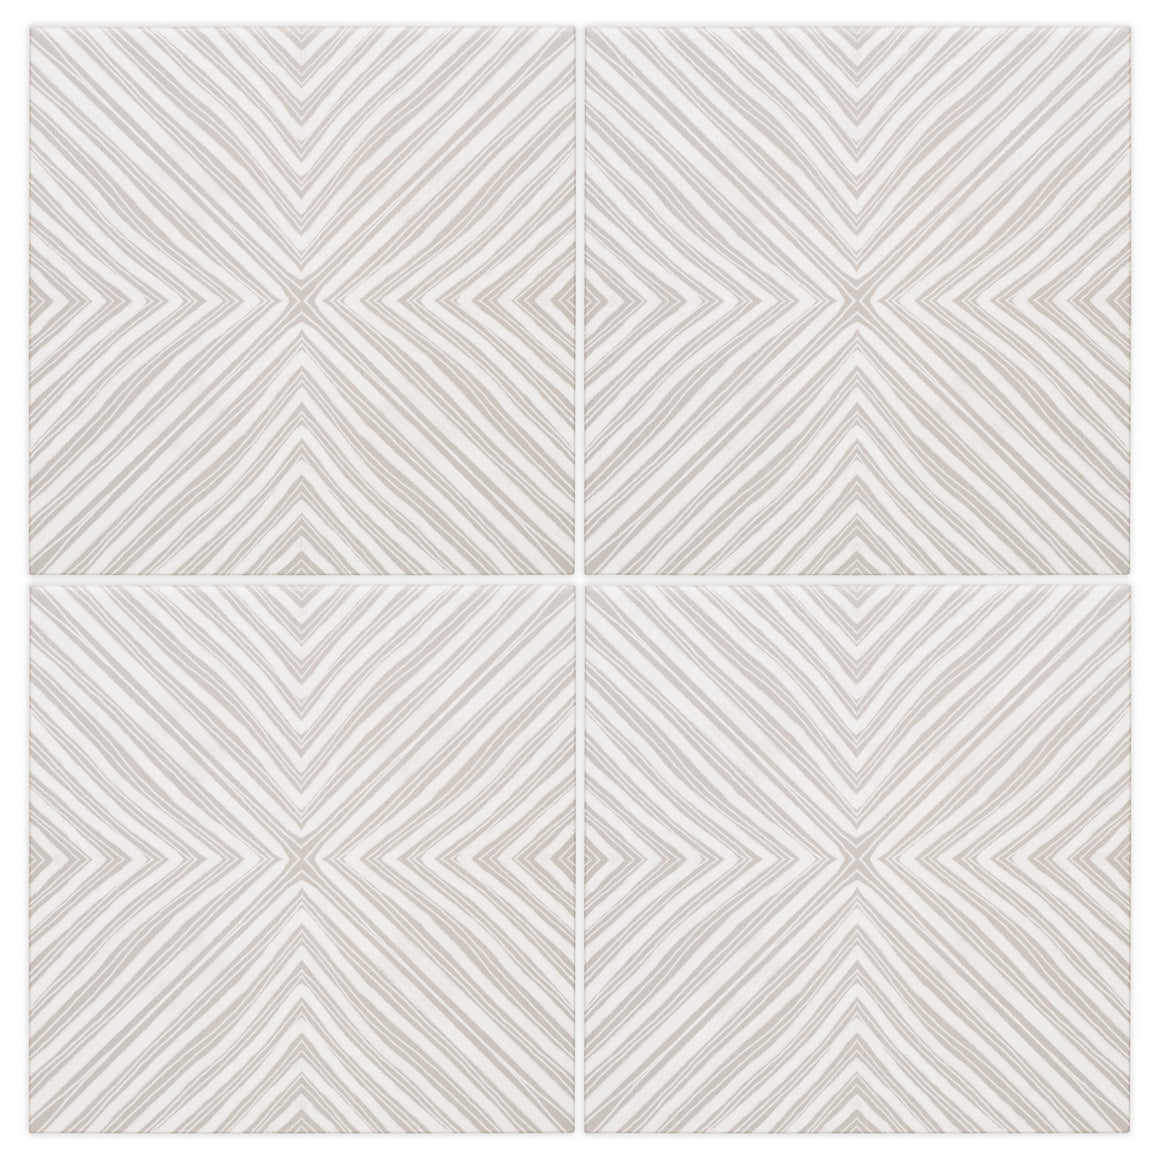 Chex Greyscale classic matte porcelain decorative pattern tile for residential and commercial bathroom and kitchen floor and wall imported from Italy, Self More Decor 12 available from TilesInspired Canada's Online Tile Store delivering across Ontario and Quebec, including Toronto, Montreal, Ottawa, London, Windsor, Kitchener, Muskoka, Barrie, Kingston, Hamilton, and Niagara decoration idea